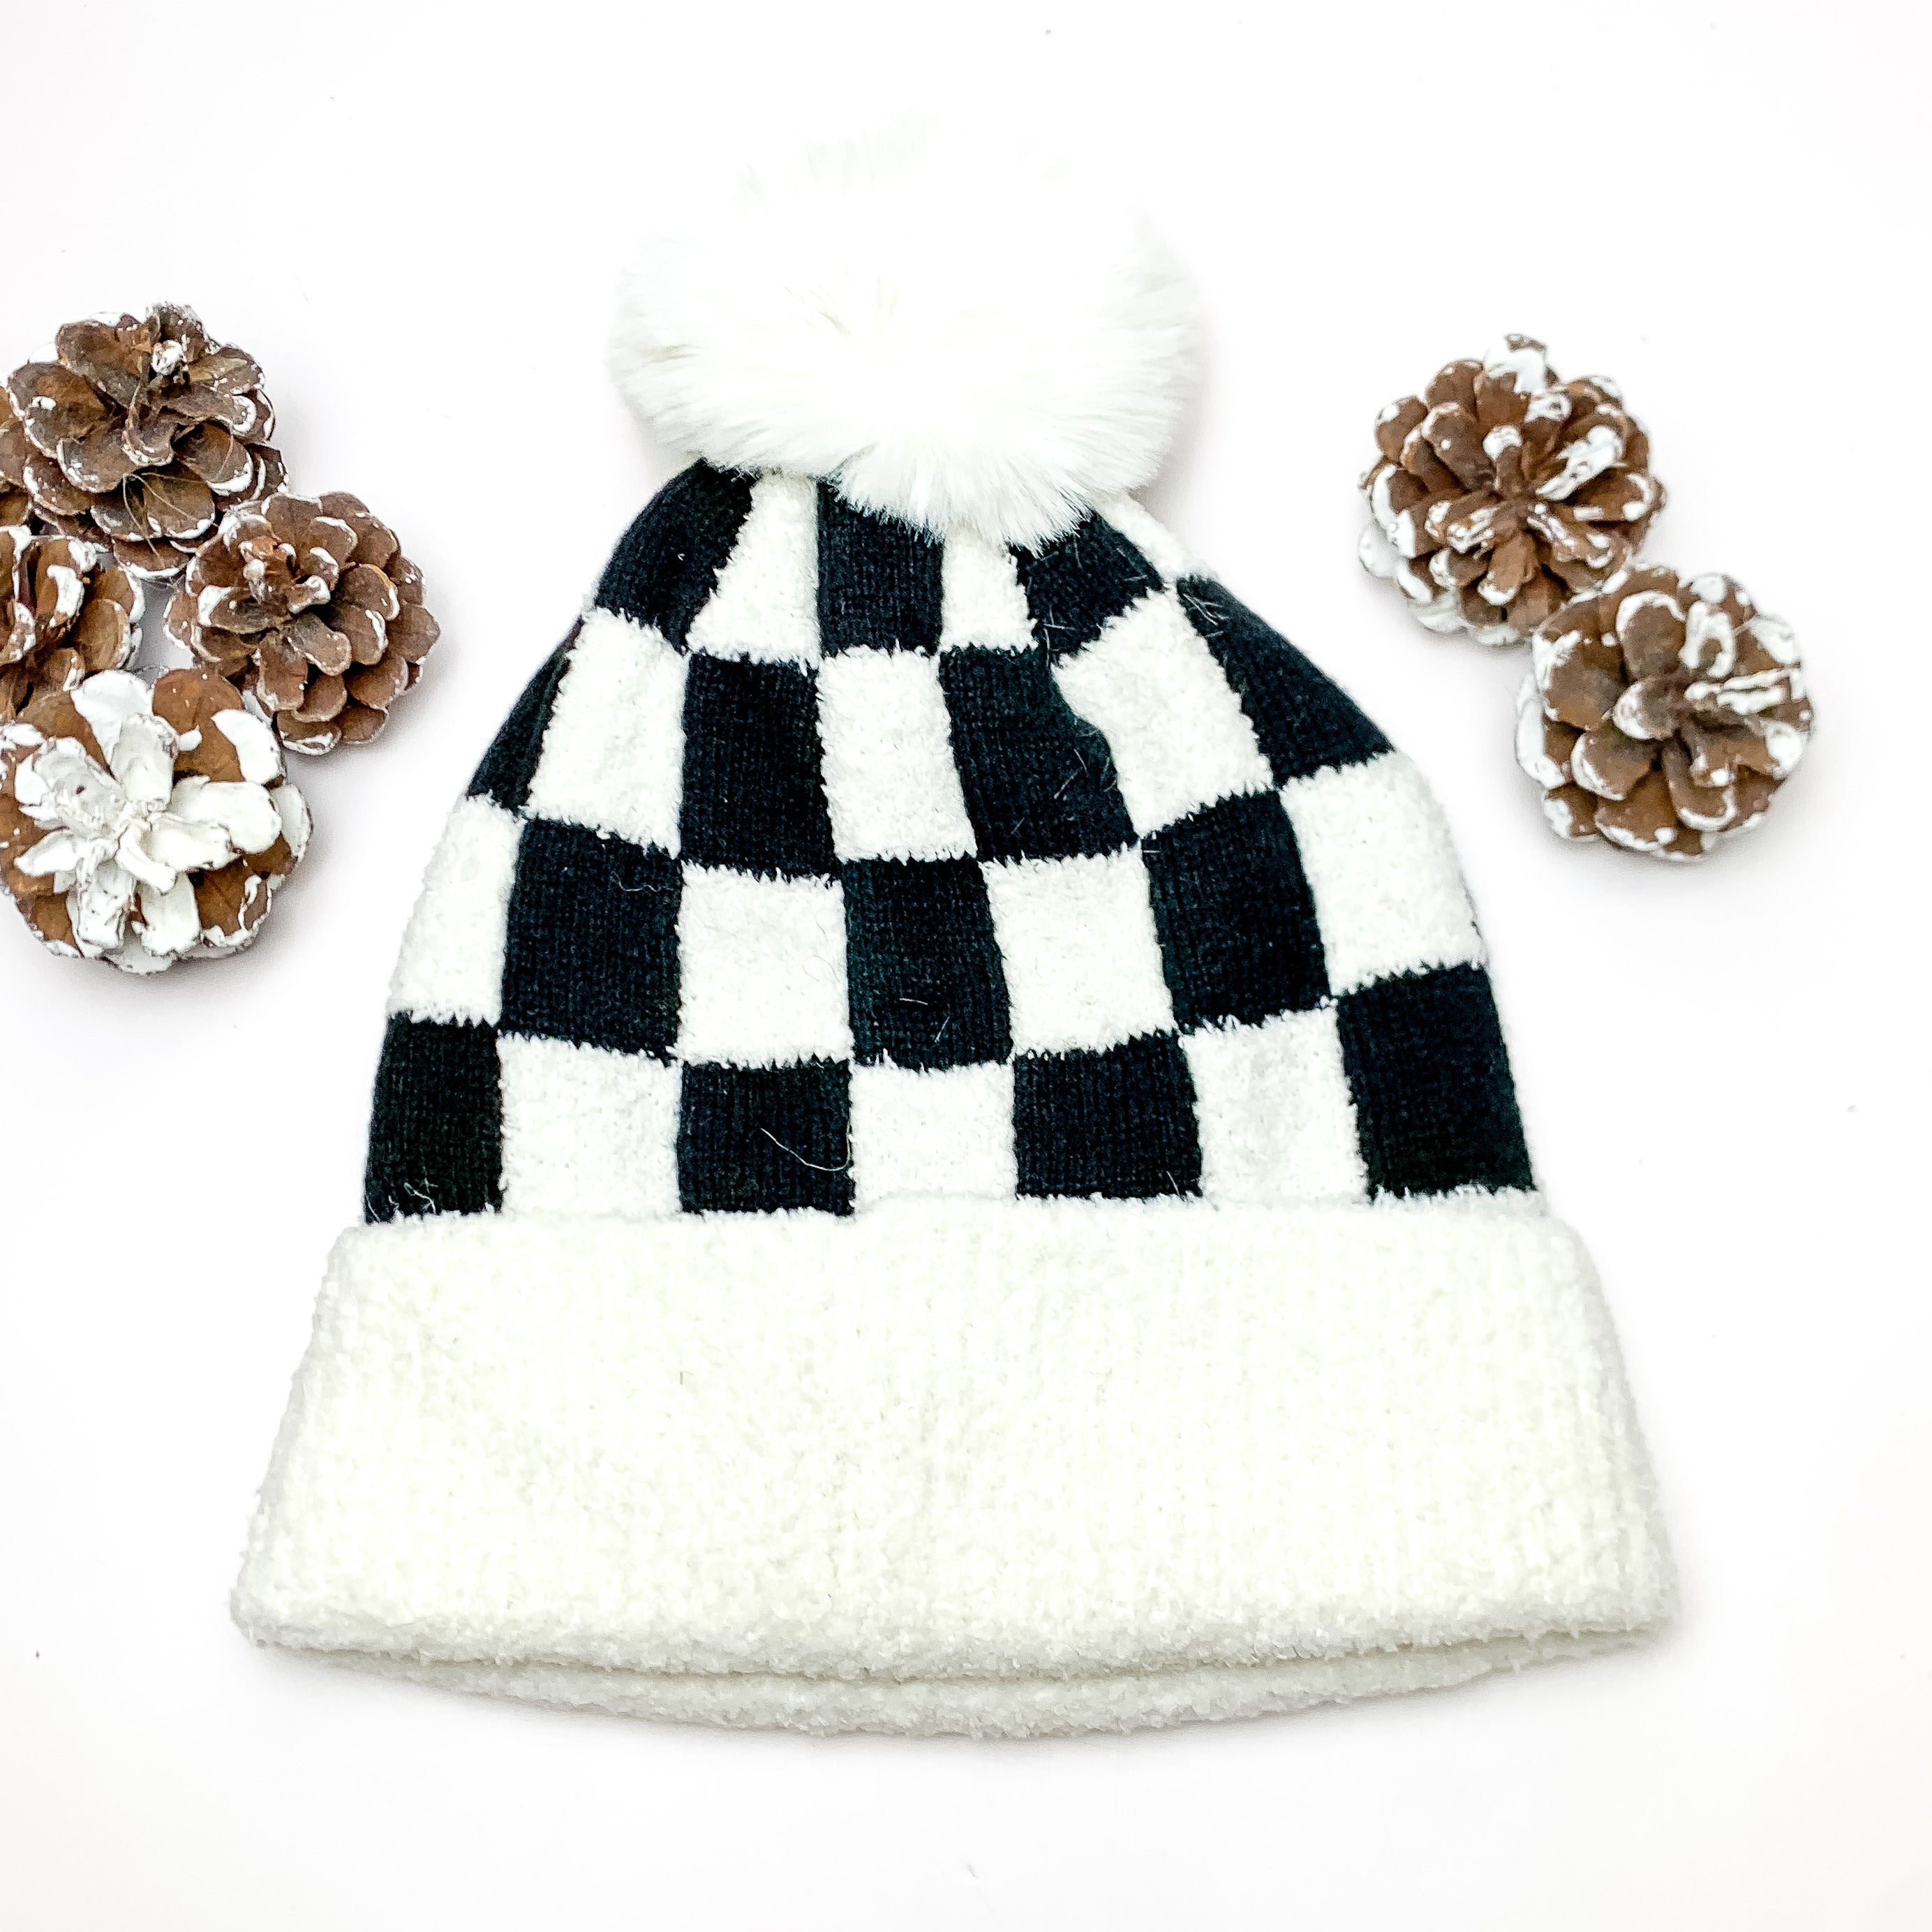 Checkered Beanie in White and Black. This beanie is pictured on a white background with pinecones around it.